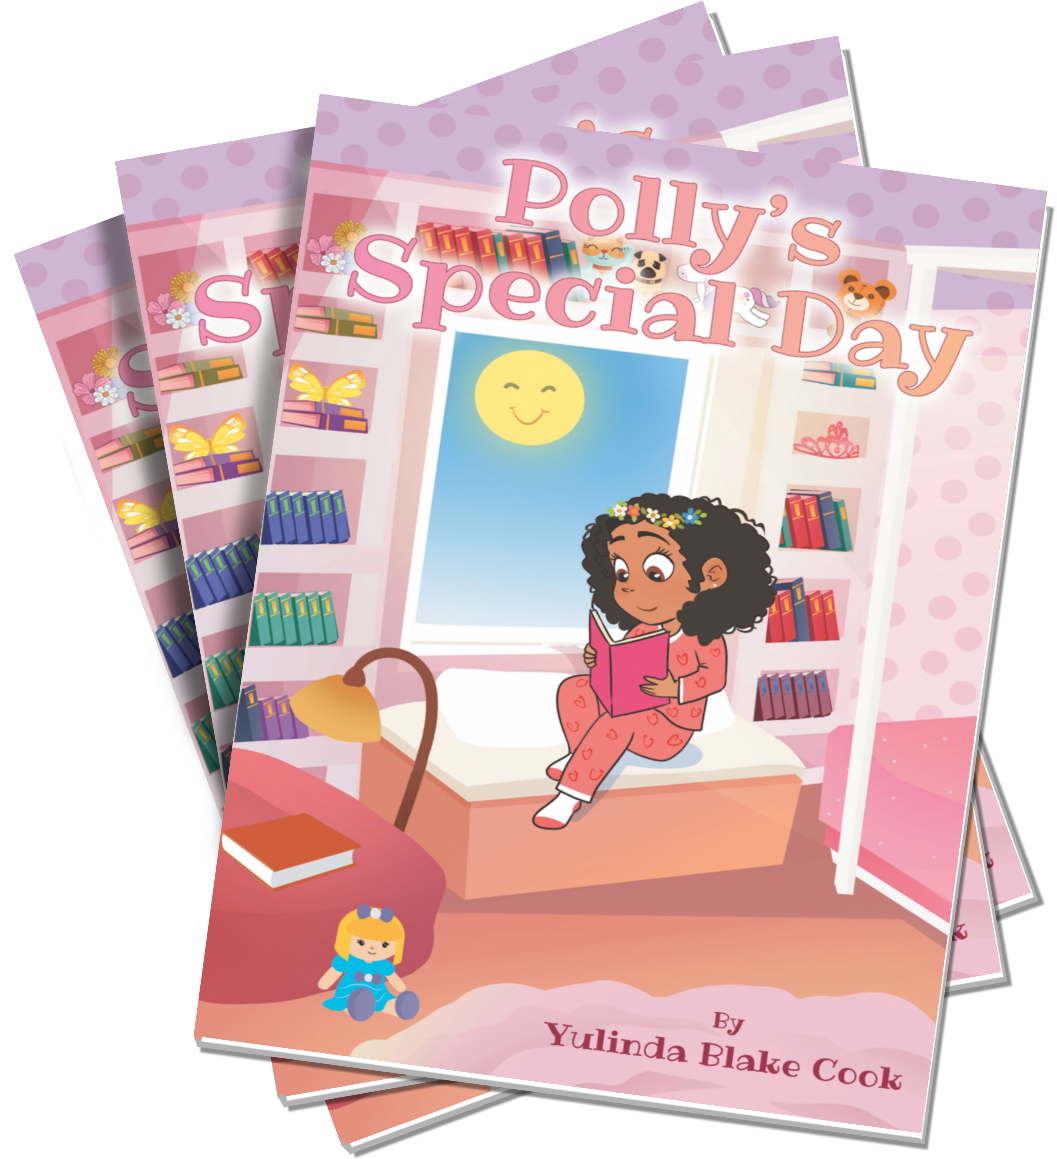 Polly's Special Day eBook
by Yulinda Blake Cook eBook.